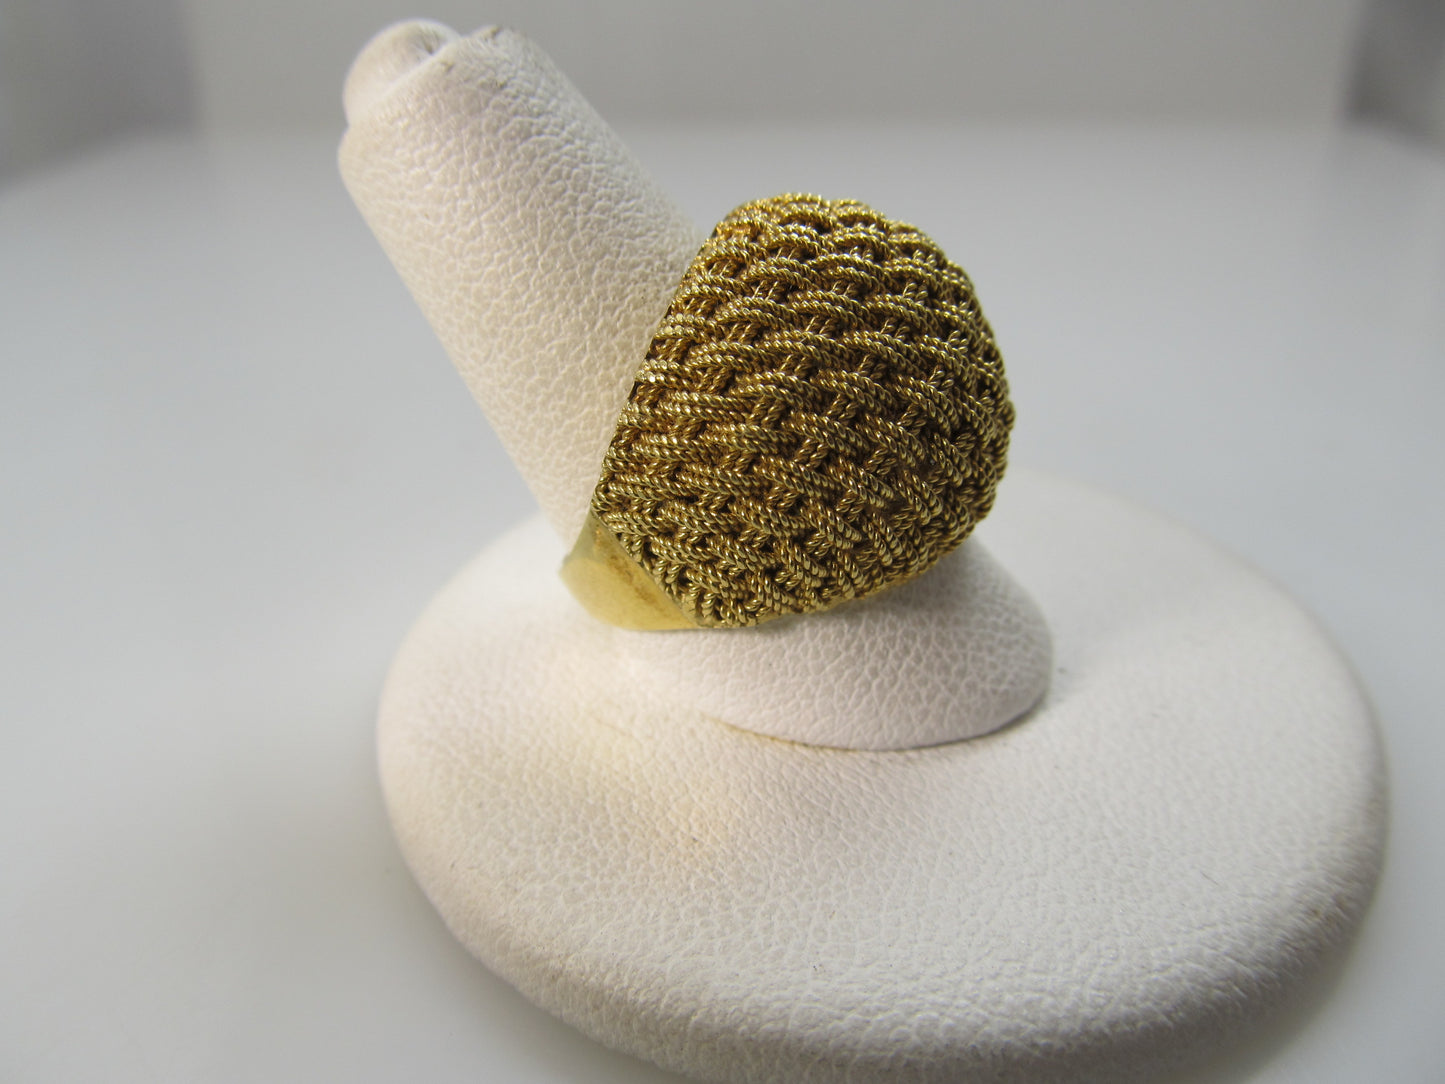 18k yellow gold woven dome ring